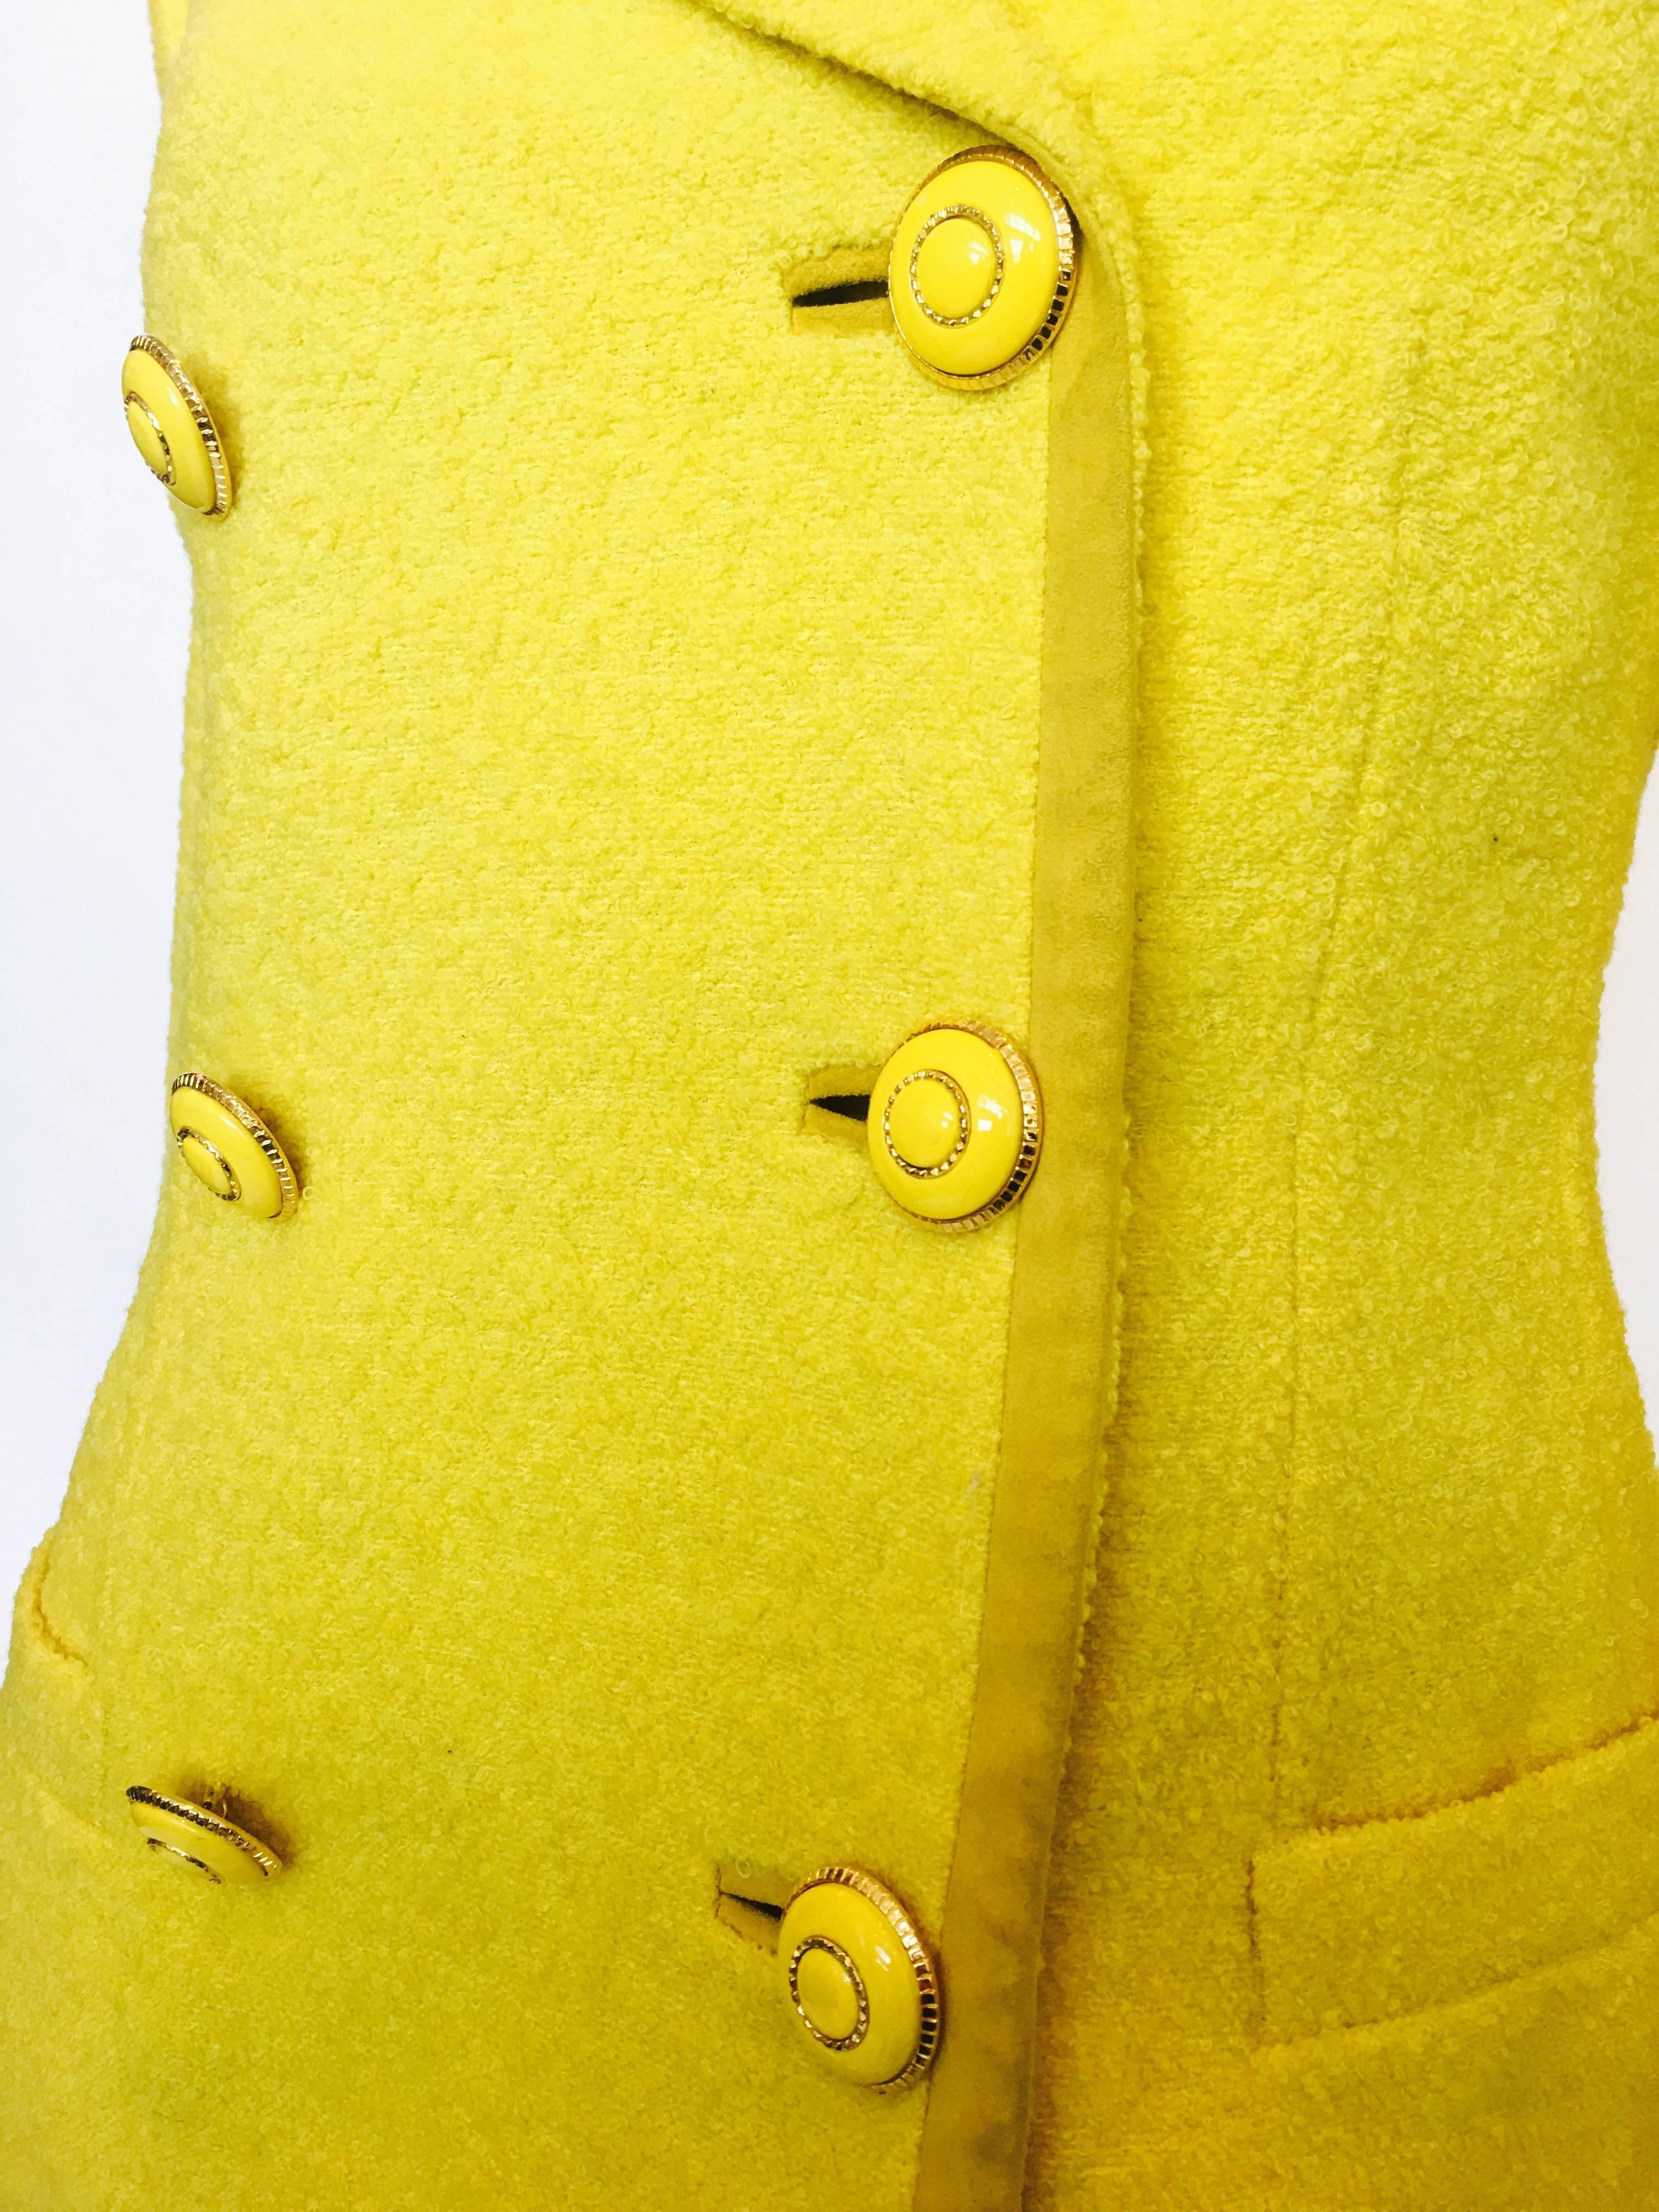 Gianni Versace Yellow Nubby Knit 2 Pc Skirt Suit 
Double Breasted with Original tags.

Jacket Size Label - 4
Center back seam ; neck to bottom of the jacket - 25 in.
Side seam ; armpit to bottom of the jacket - 16 1/2 in.
Armpit to armpit - 15